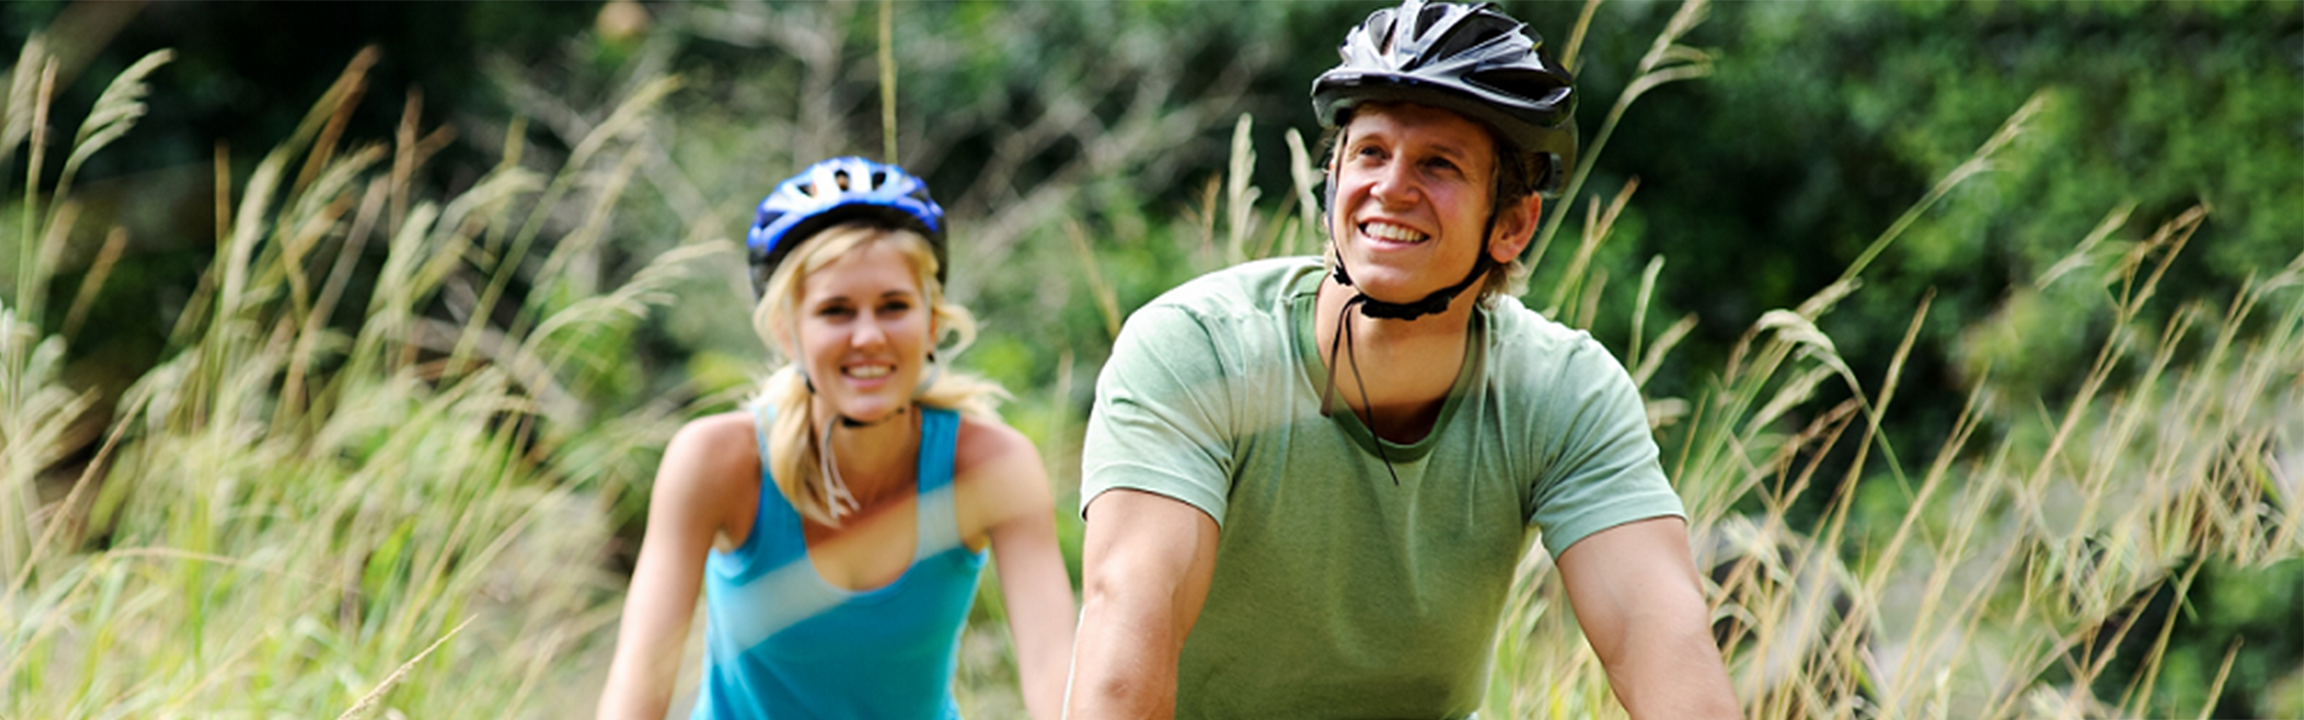 A man and a woman smile gleefully as they ride their bicycles in a field. 